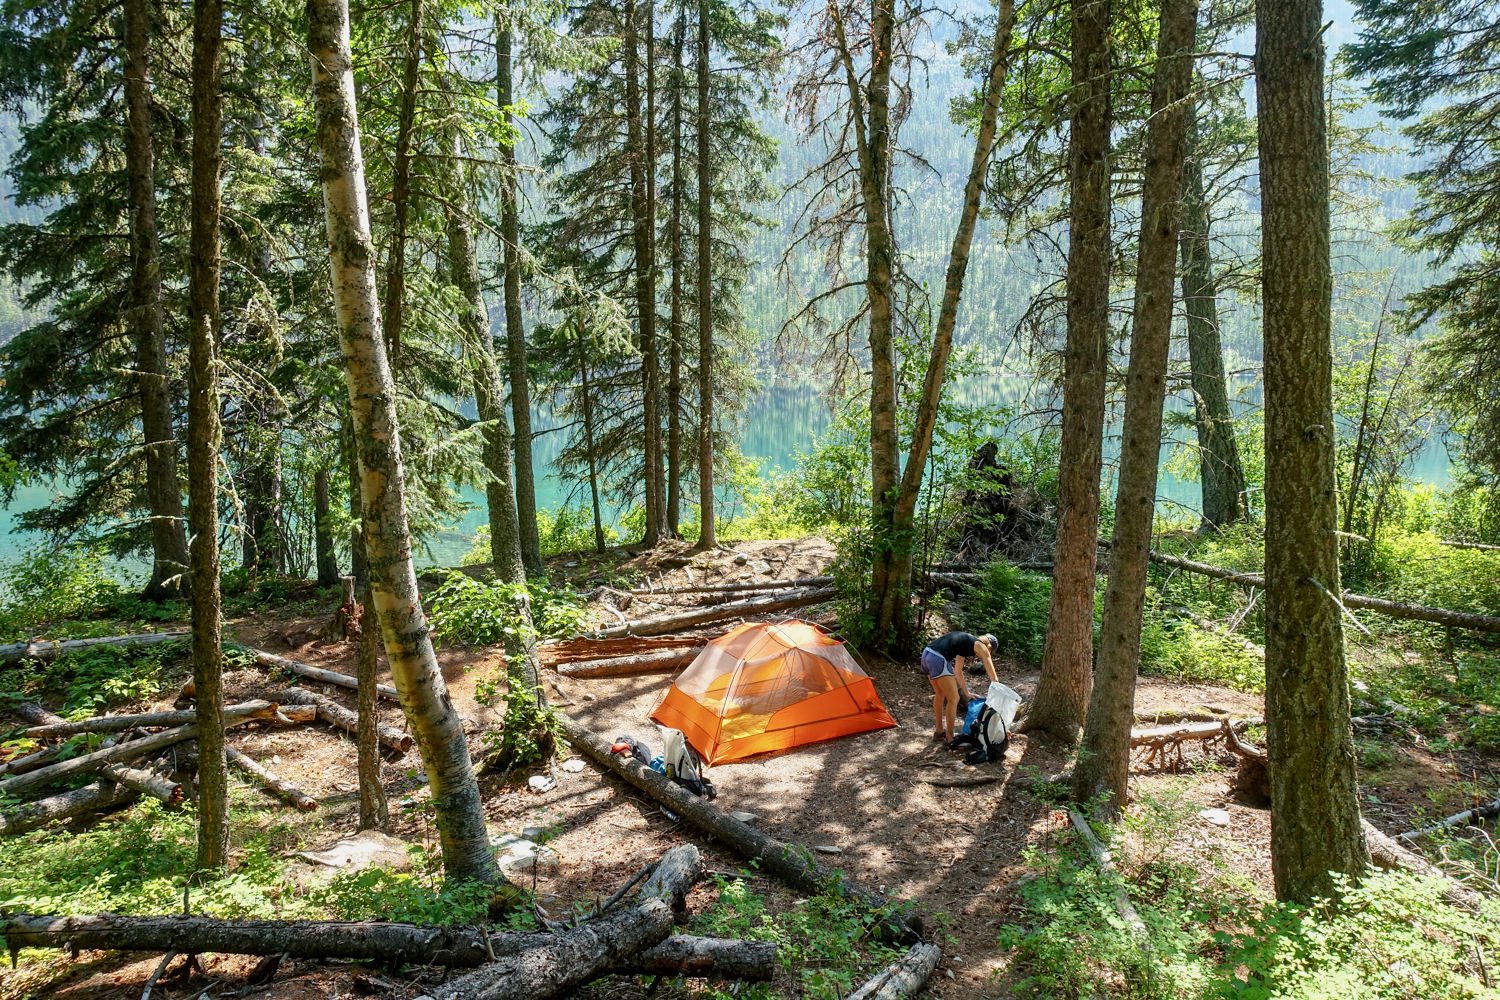 A wide view of a forest campsite with a Copper Spur HV UL3 set up and a hiker looking through their backpack